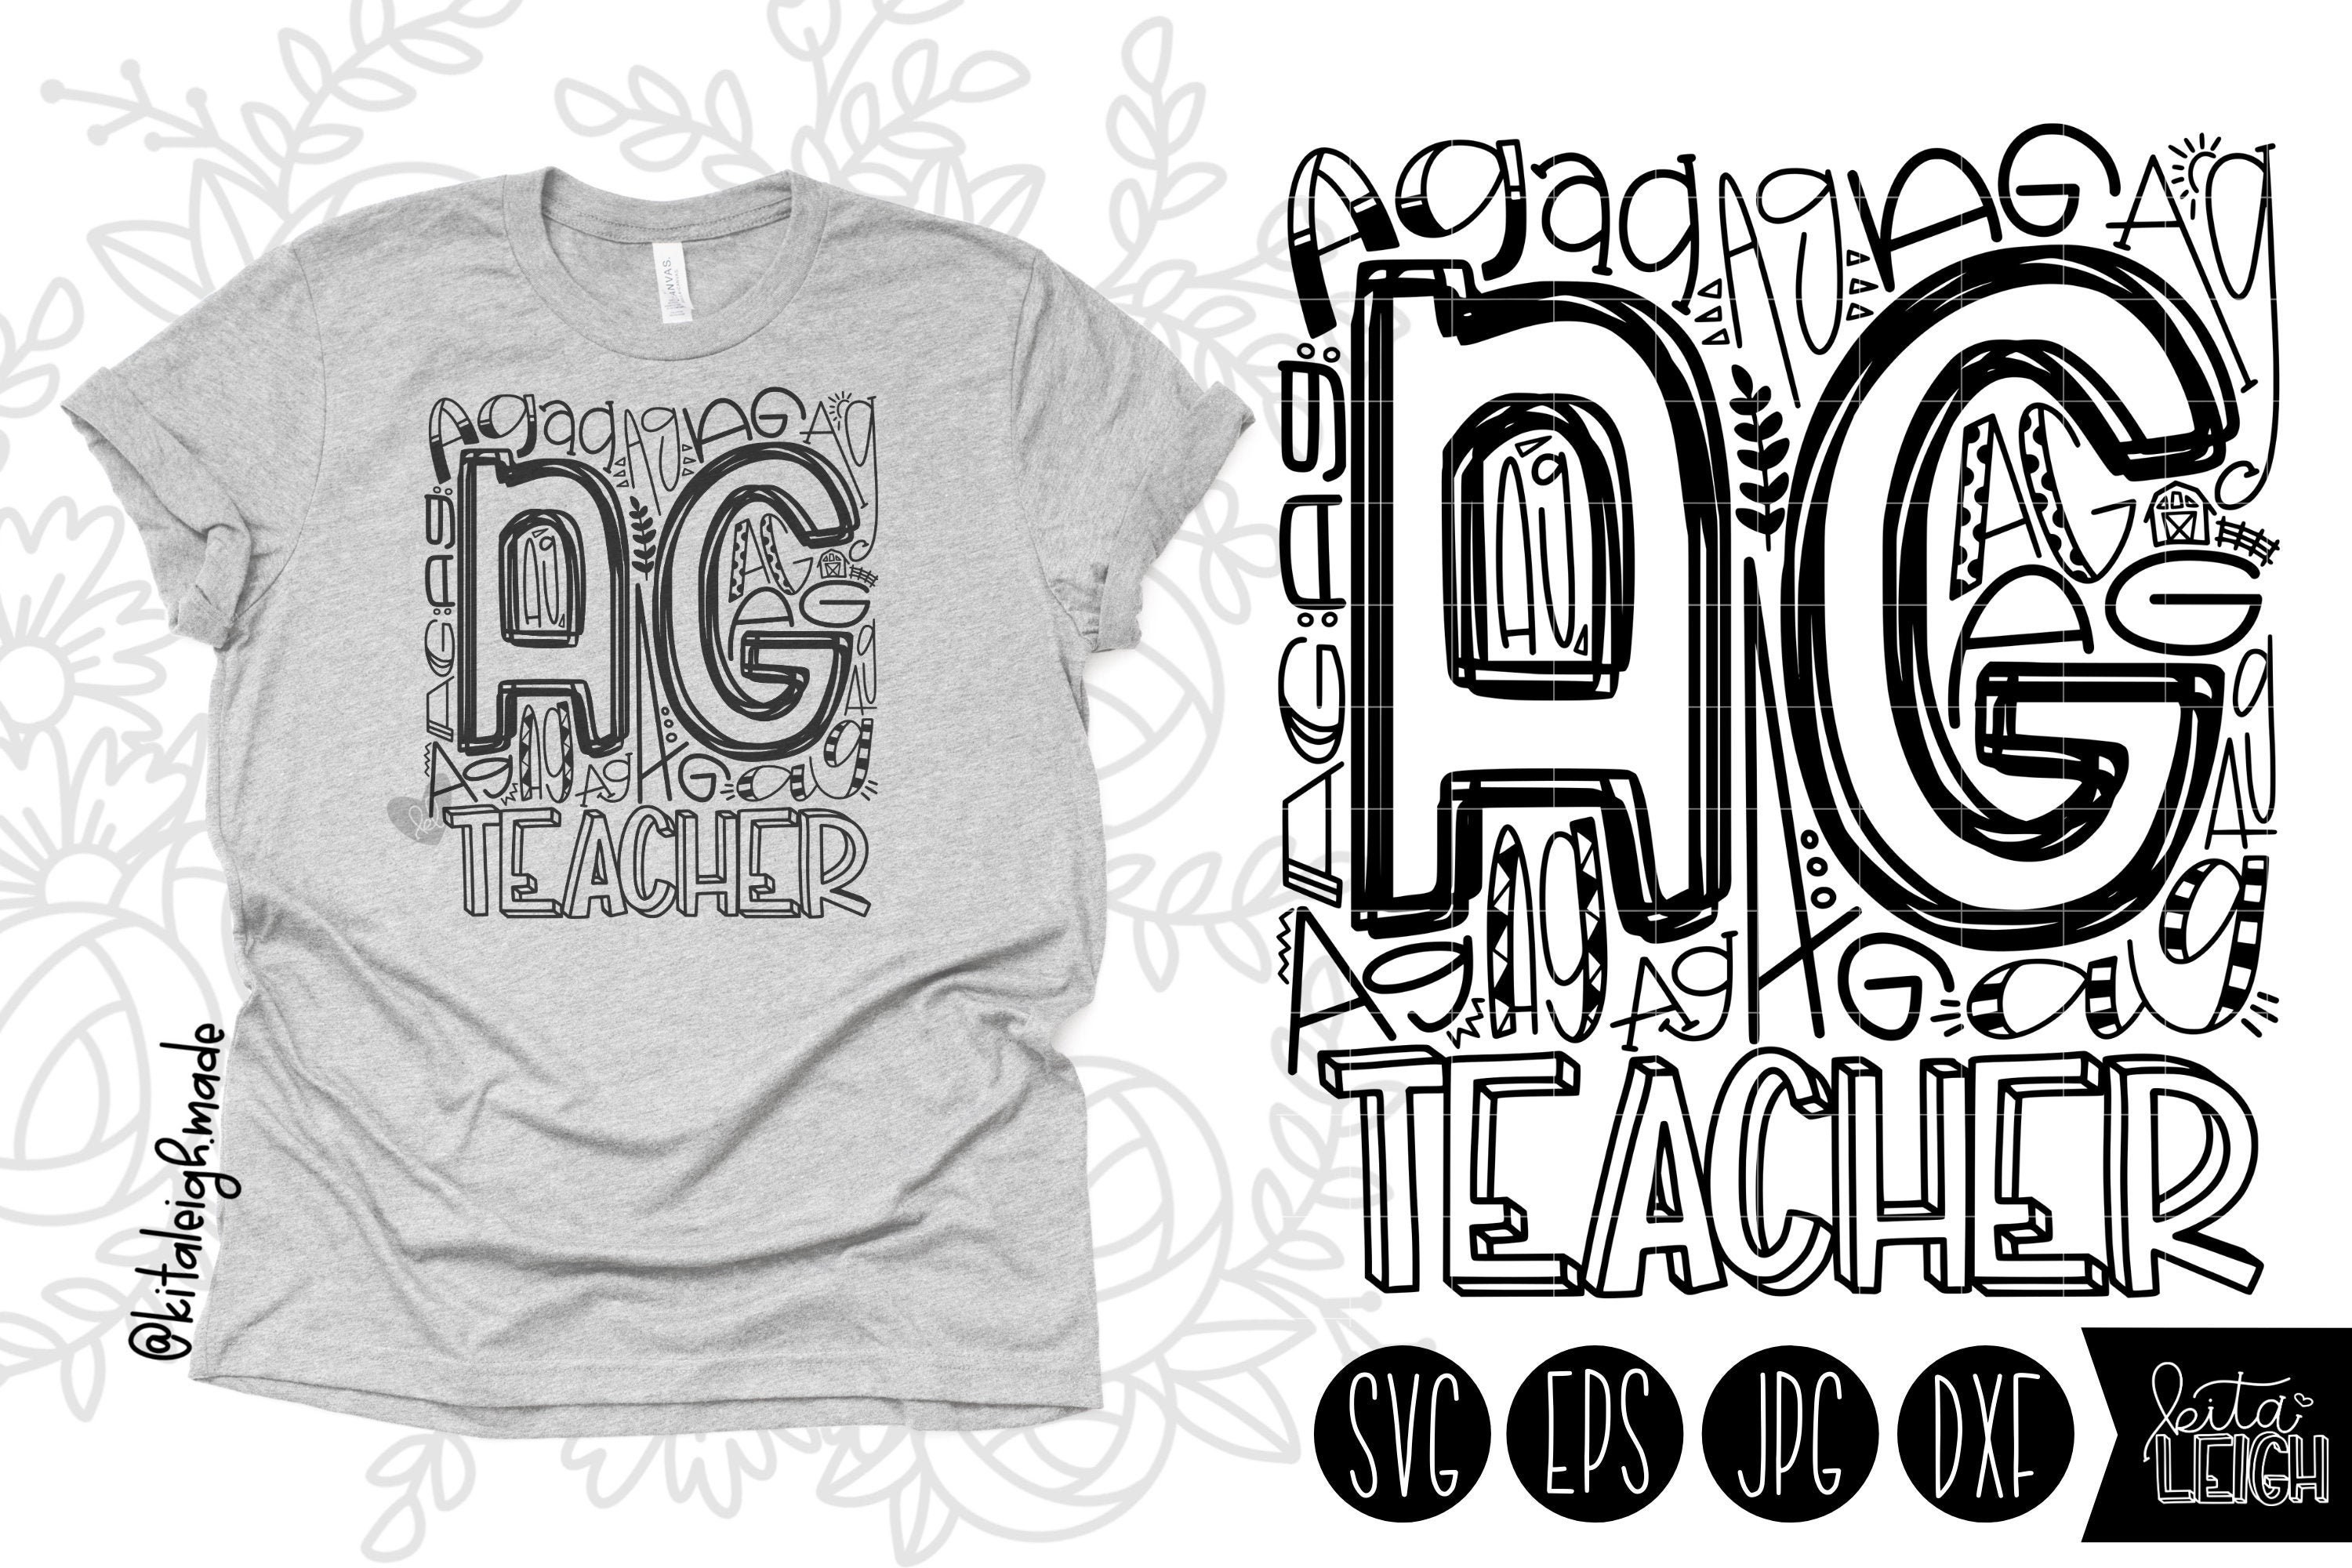 Download Ag Agriculture Teacher Typography Instant Download Dxf Svg Etsy